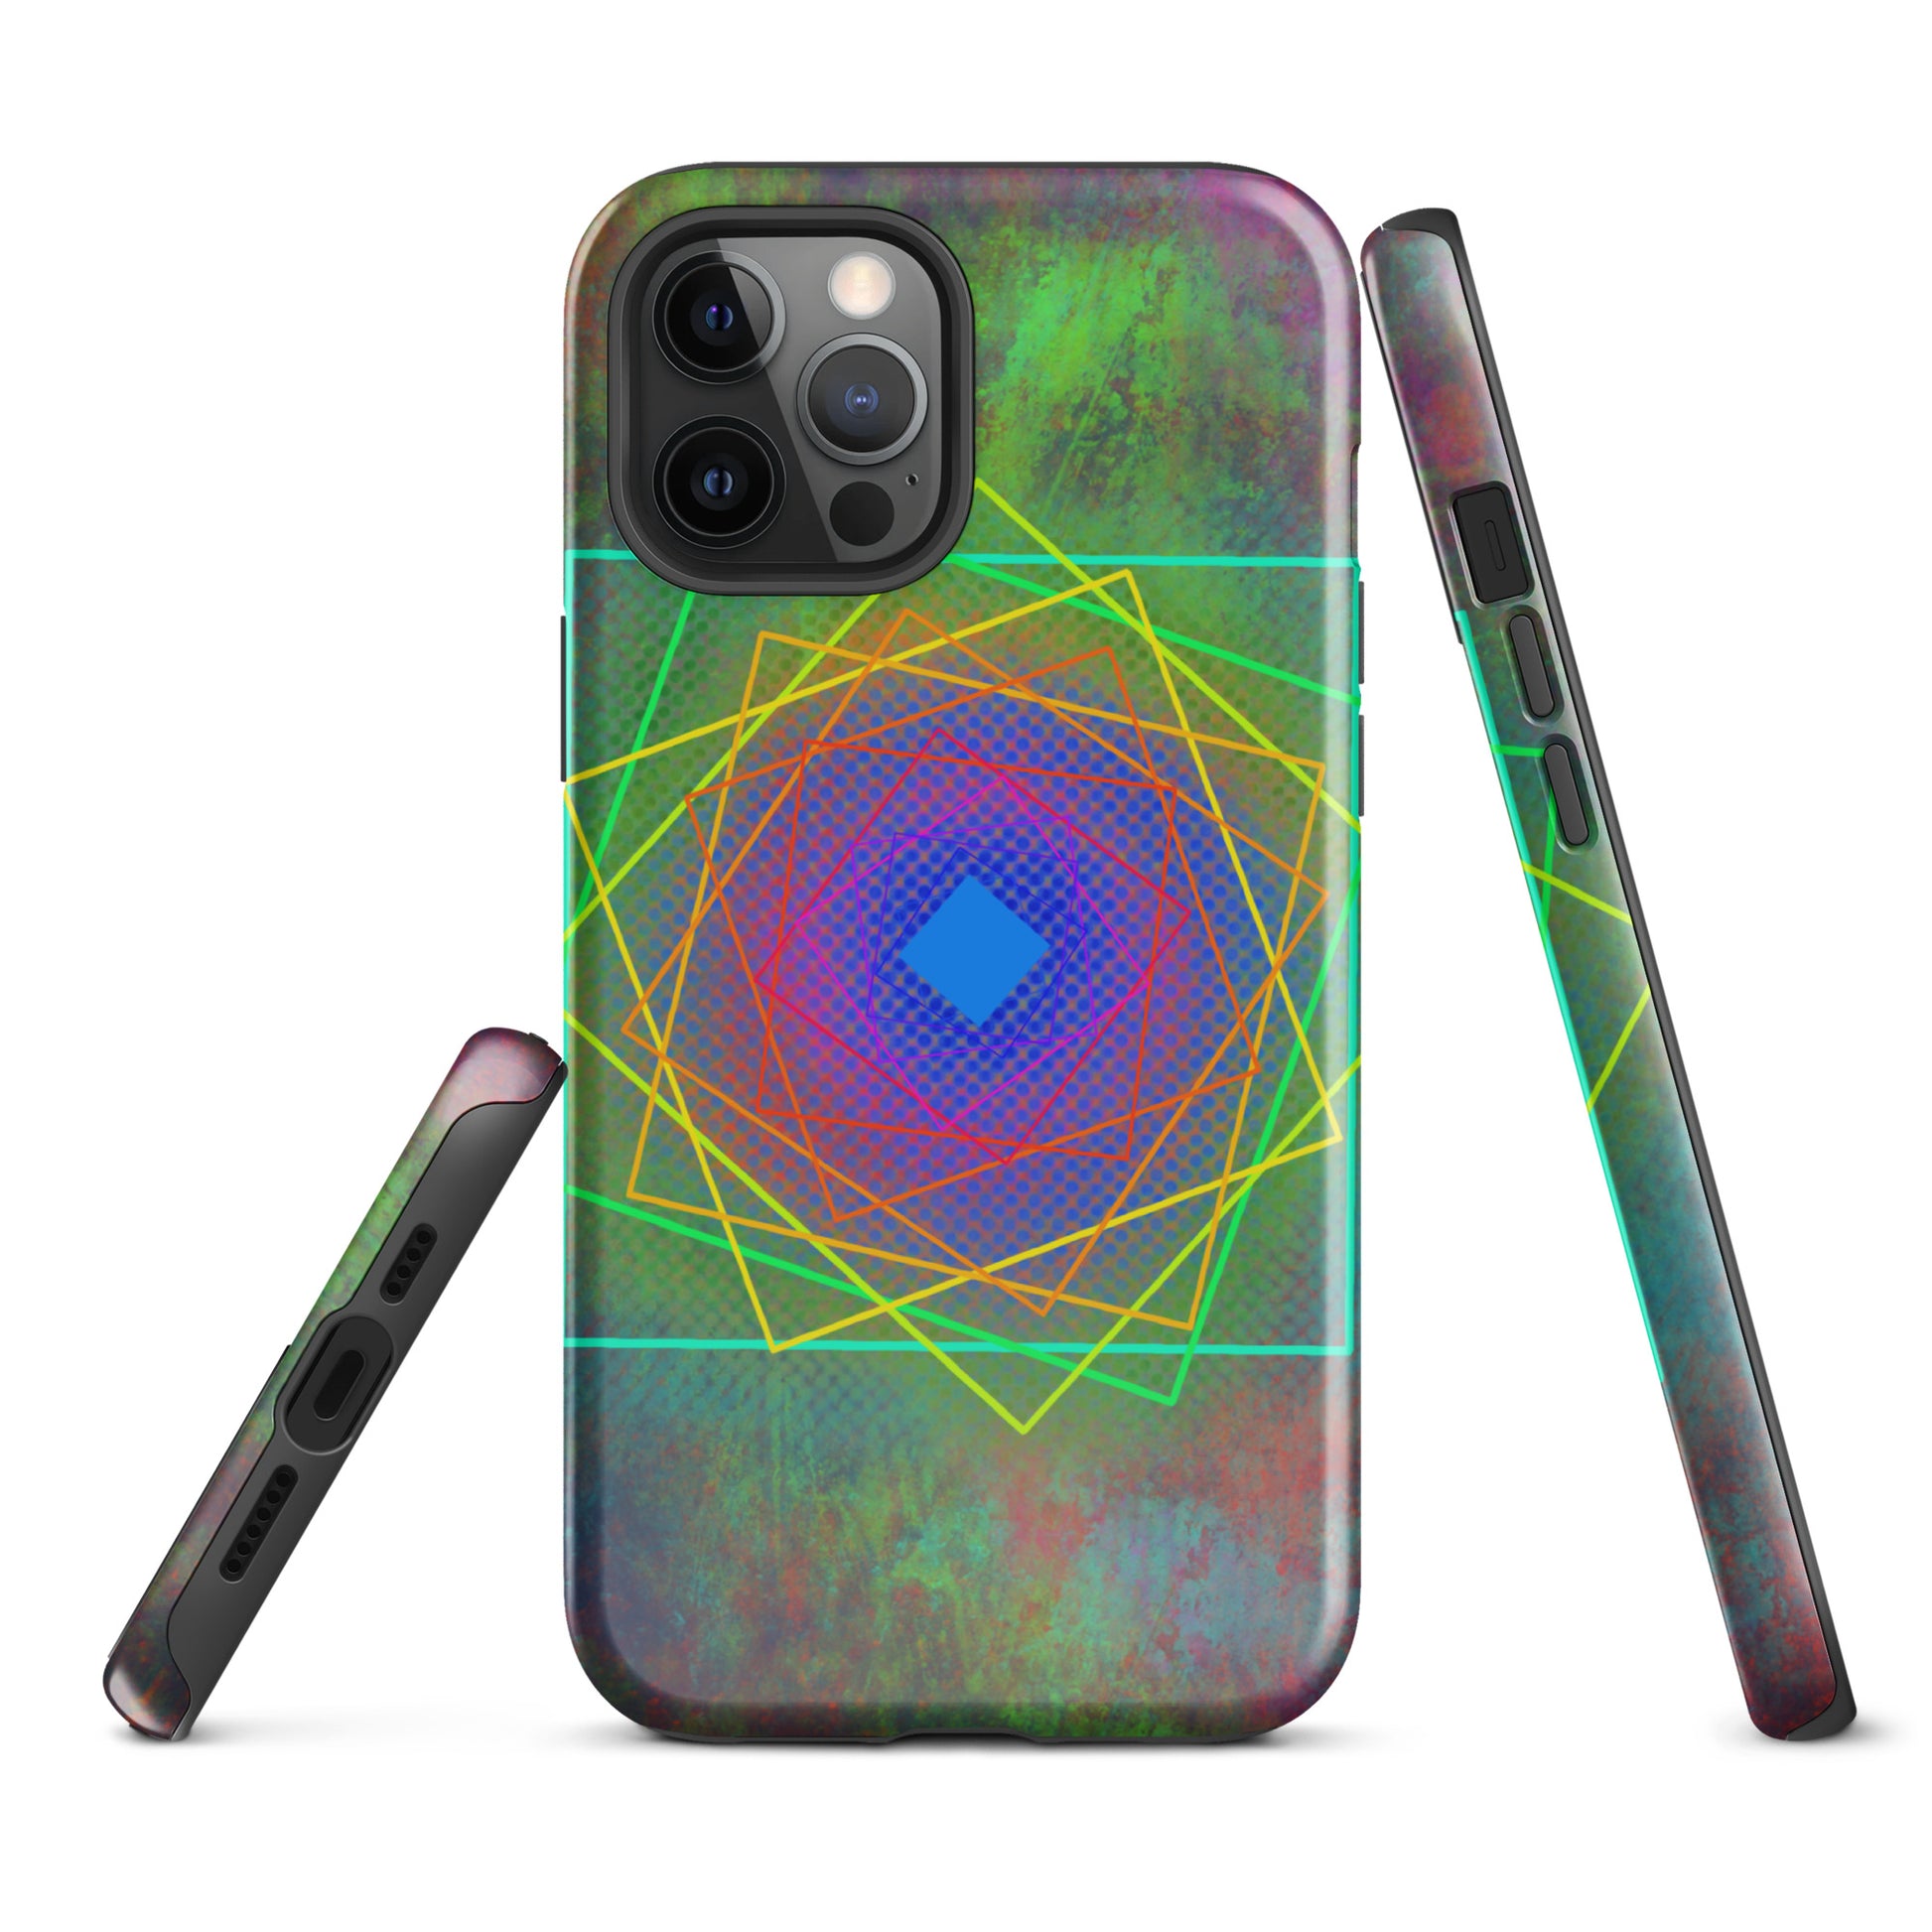 A Colourful Geometric Cubes Case for the iPhone 12 Pro Max